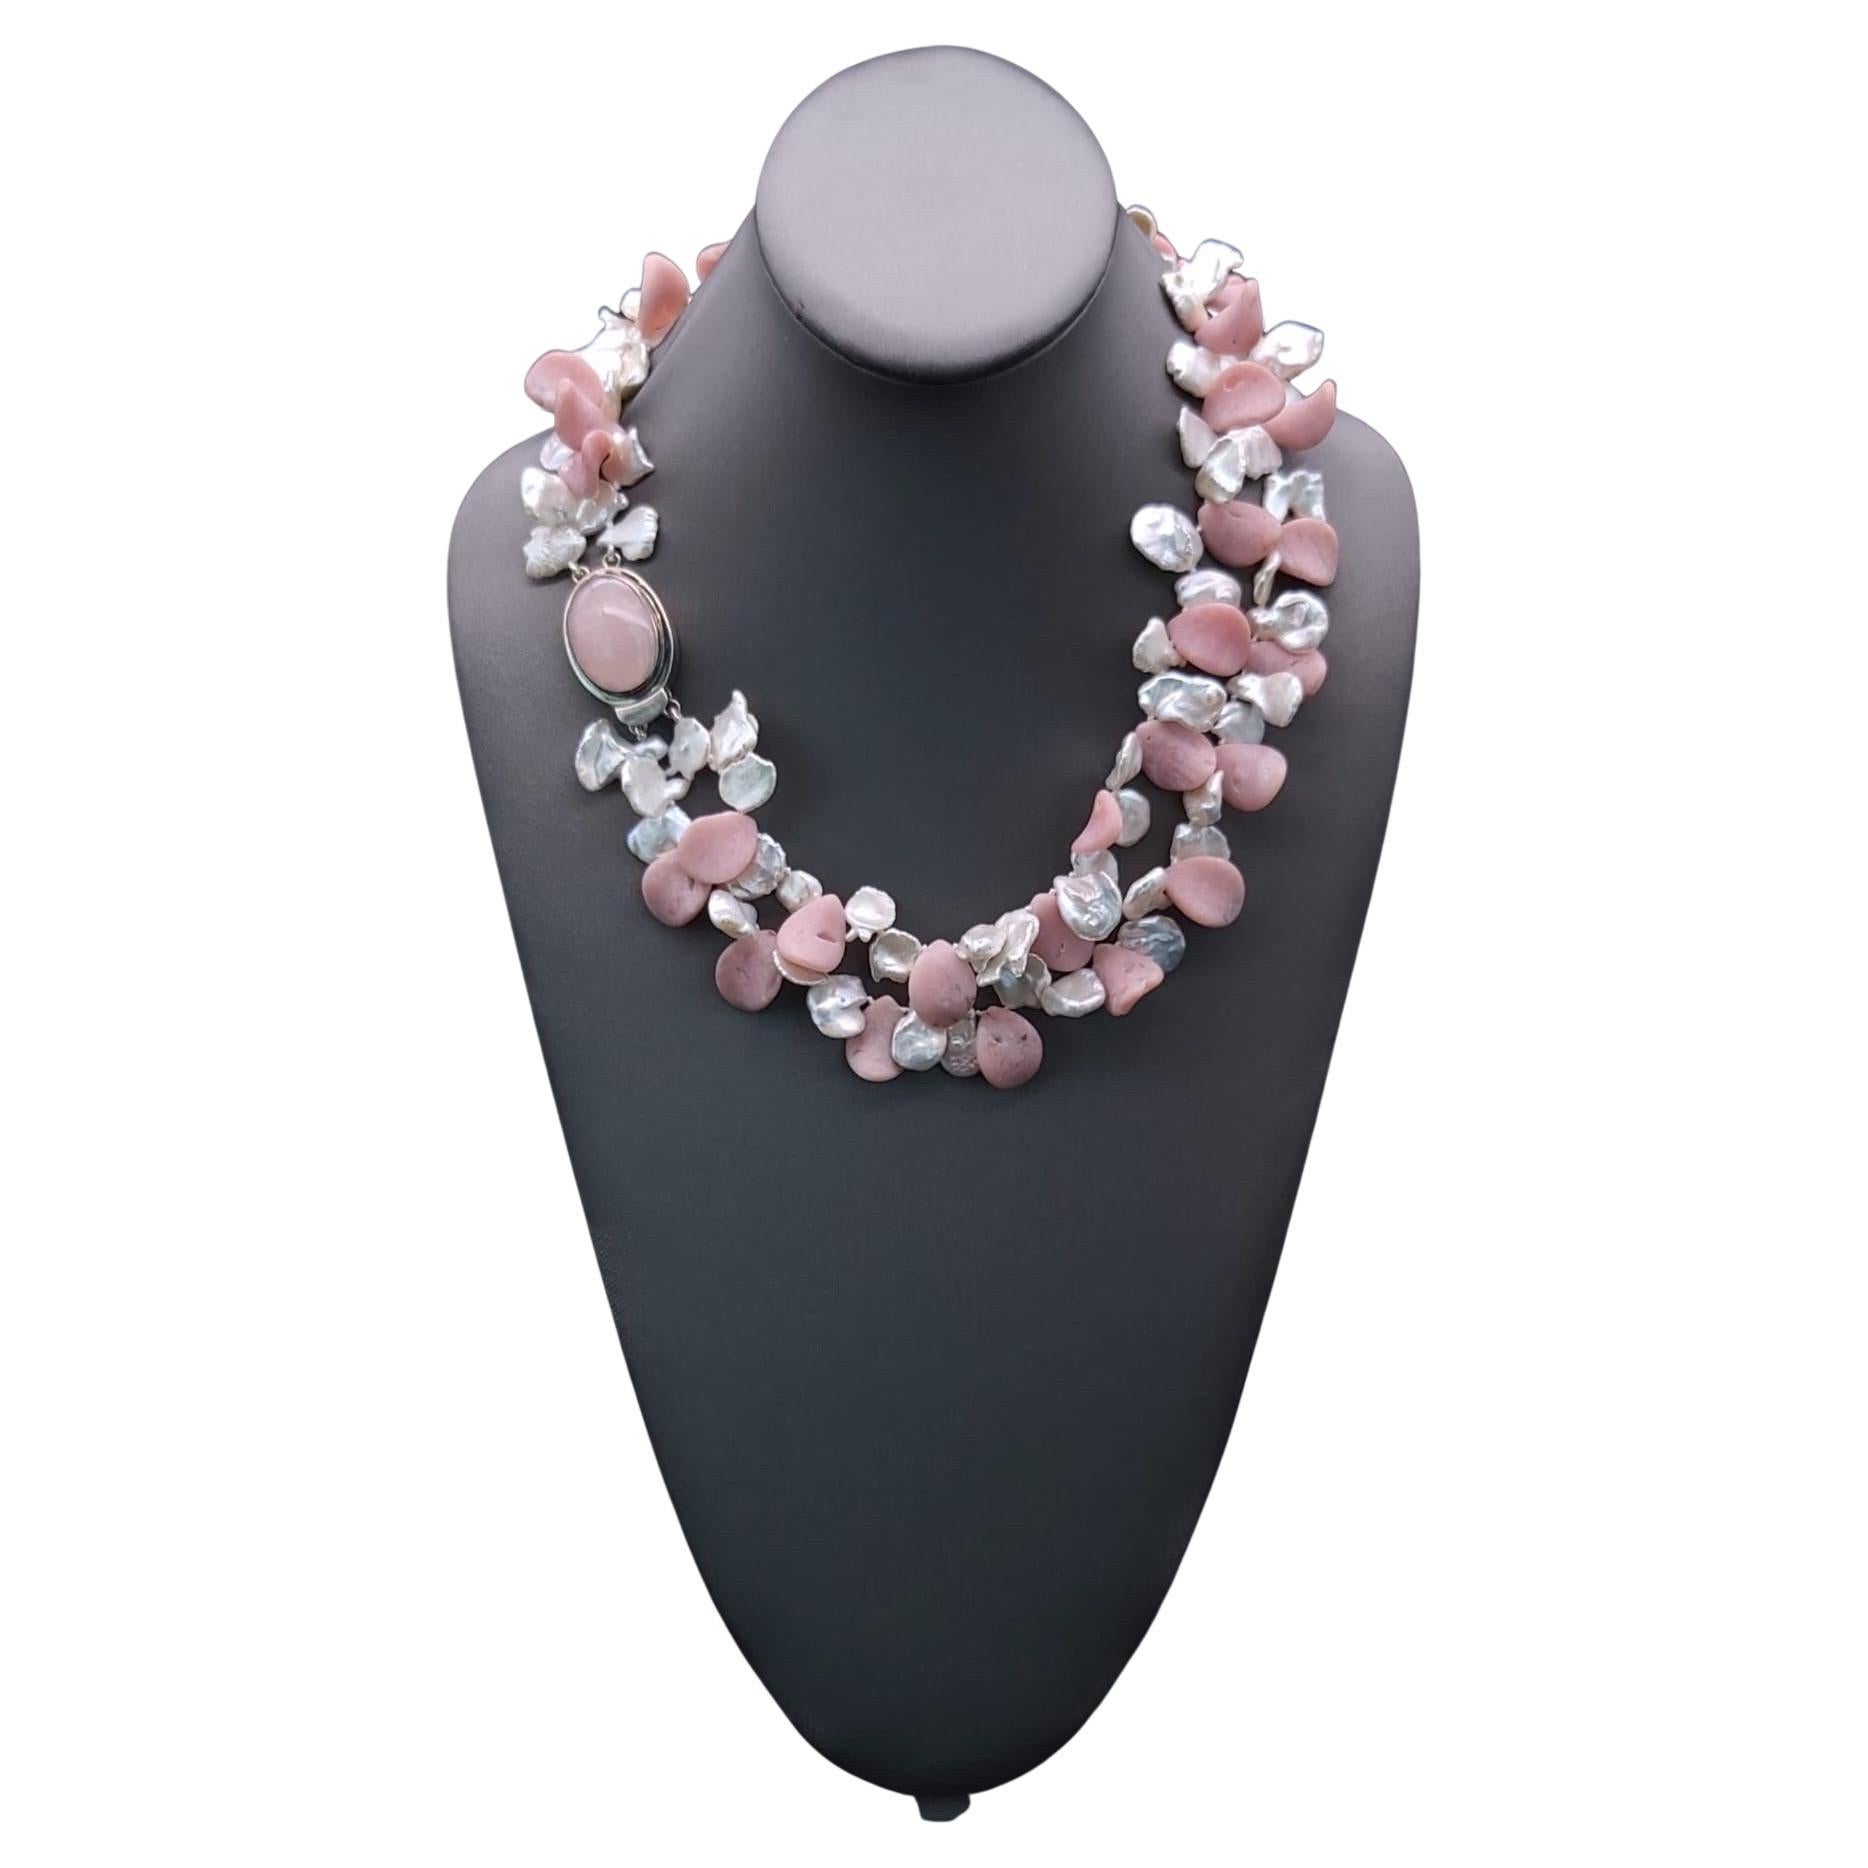 A.Jeschel 2 strand Pink Opal and Pearl necklace. For Sale